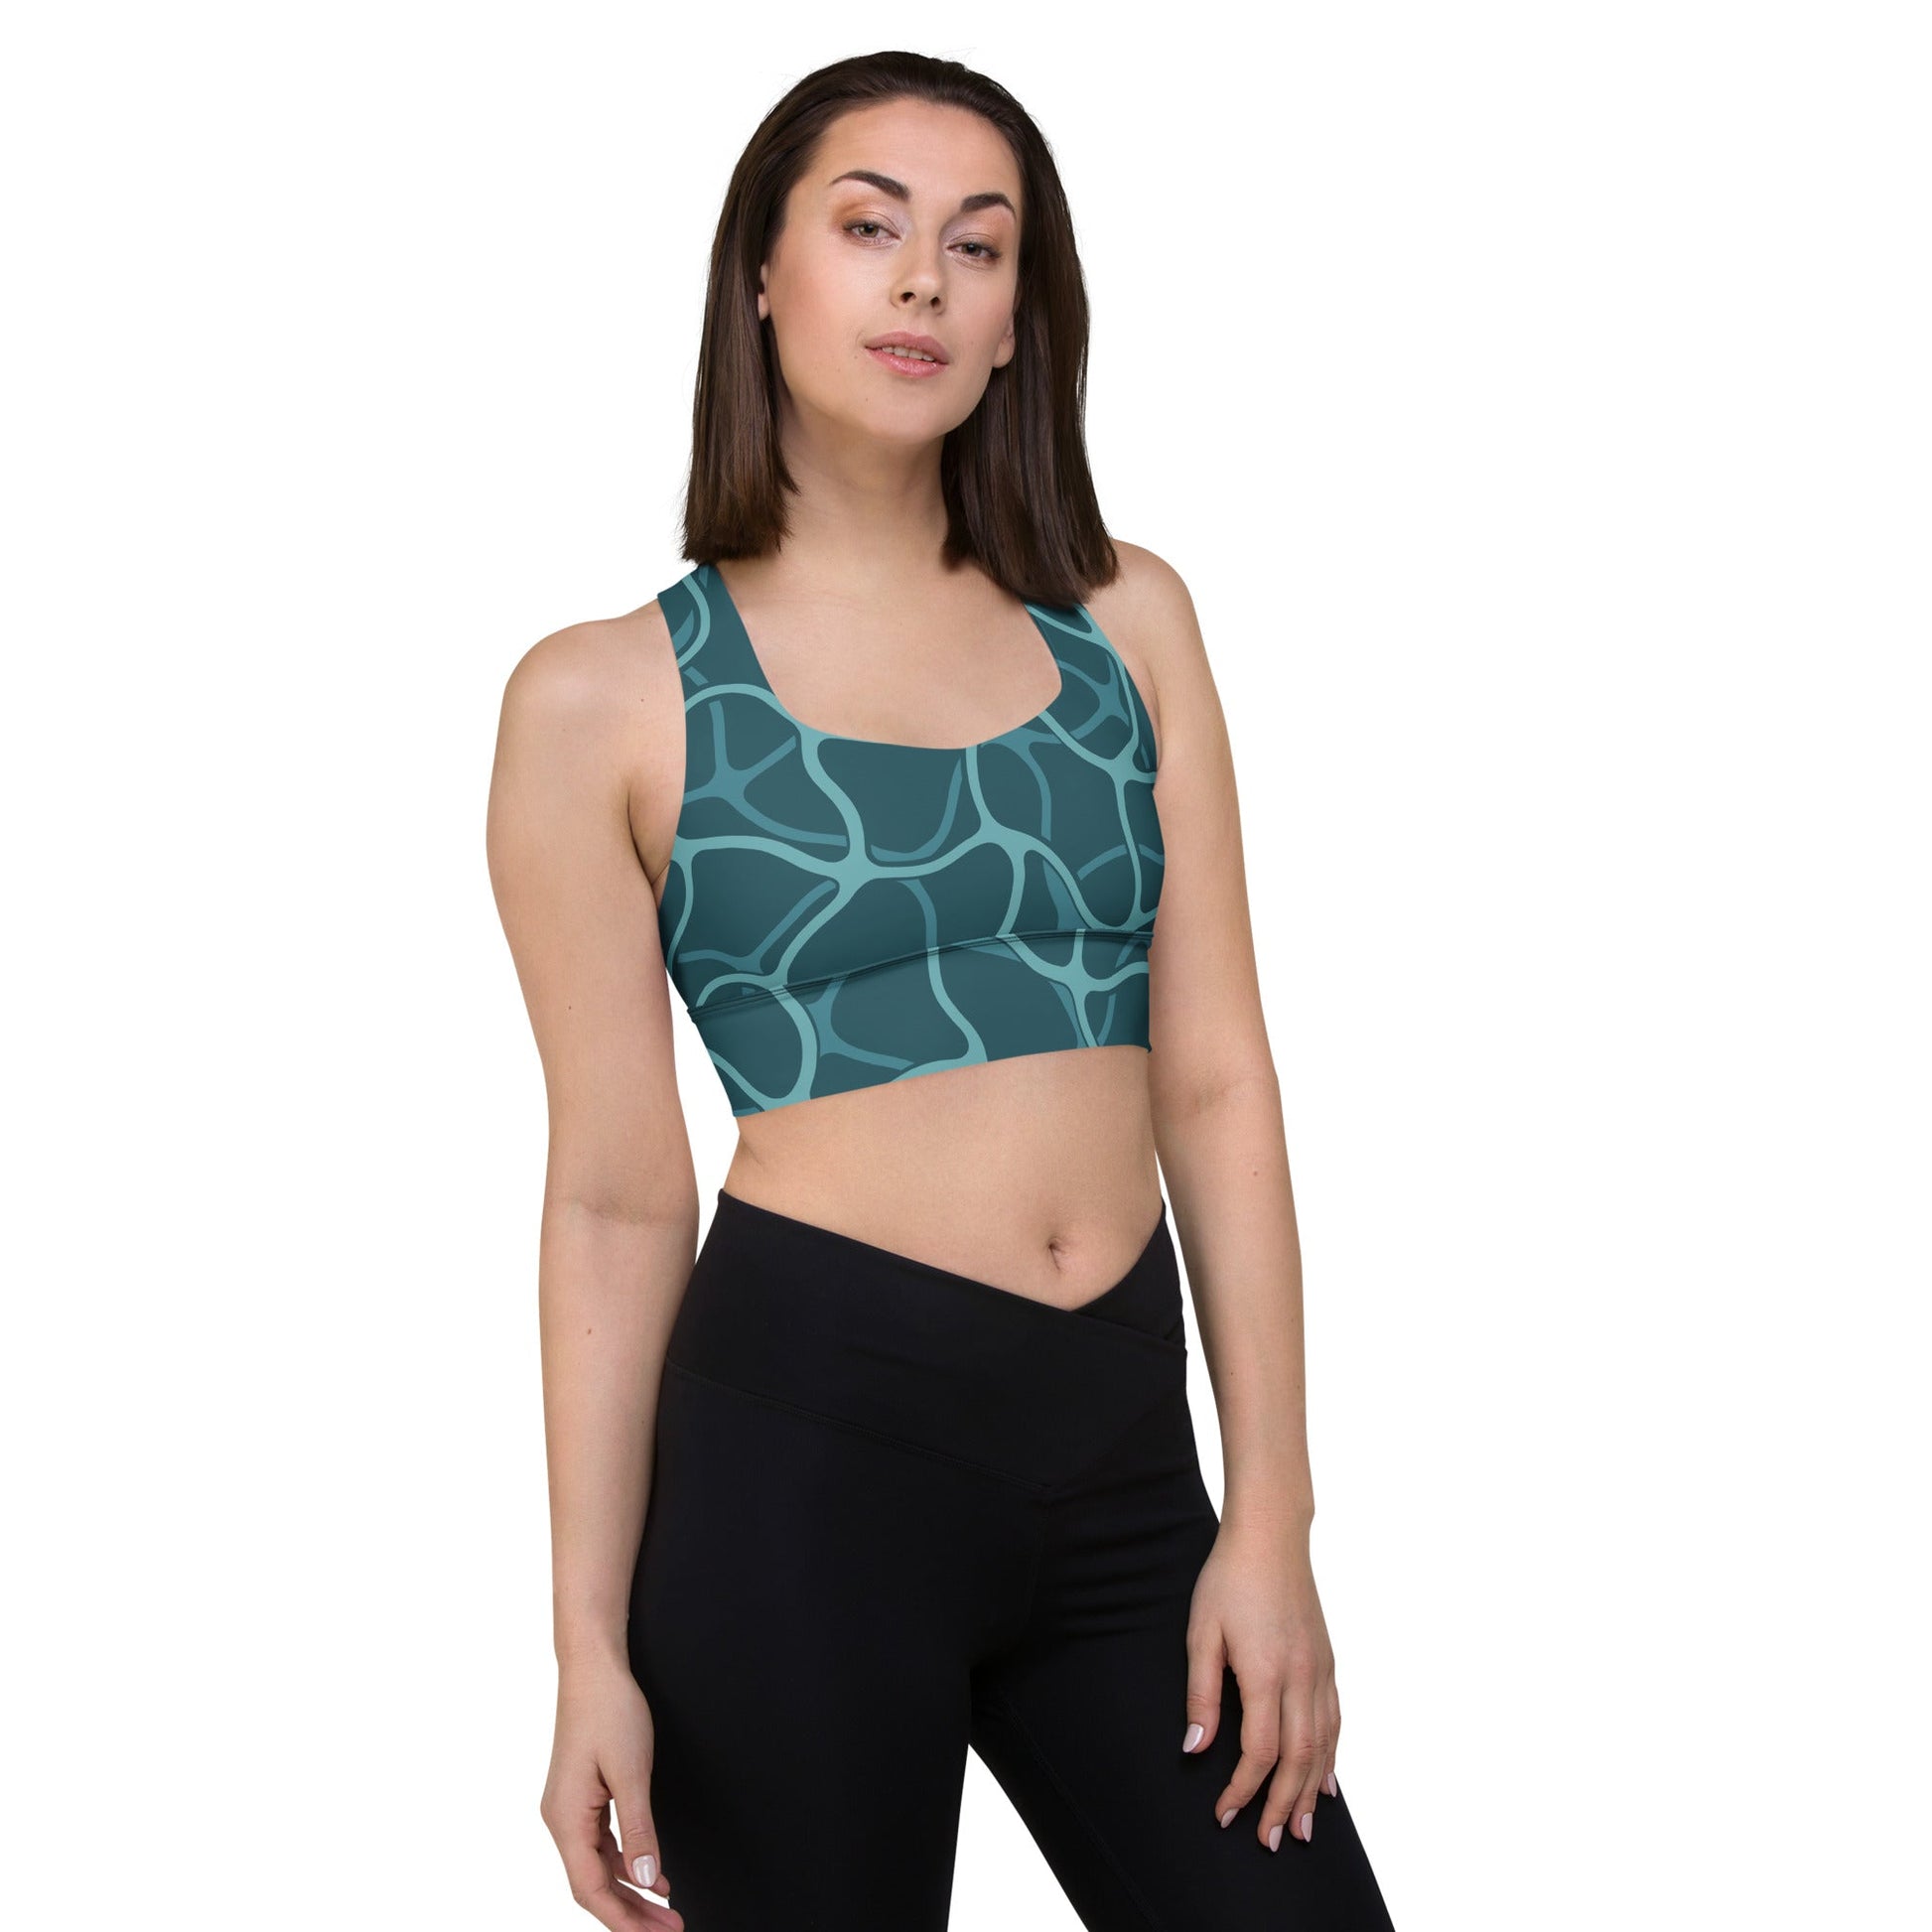 Chic Longline Sports Bra - Ultimate Support and Style for Fitness and Leisure